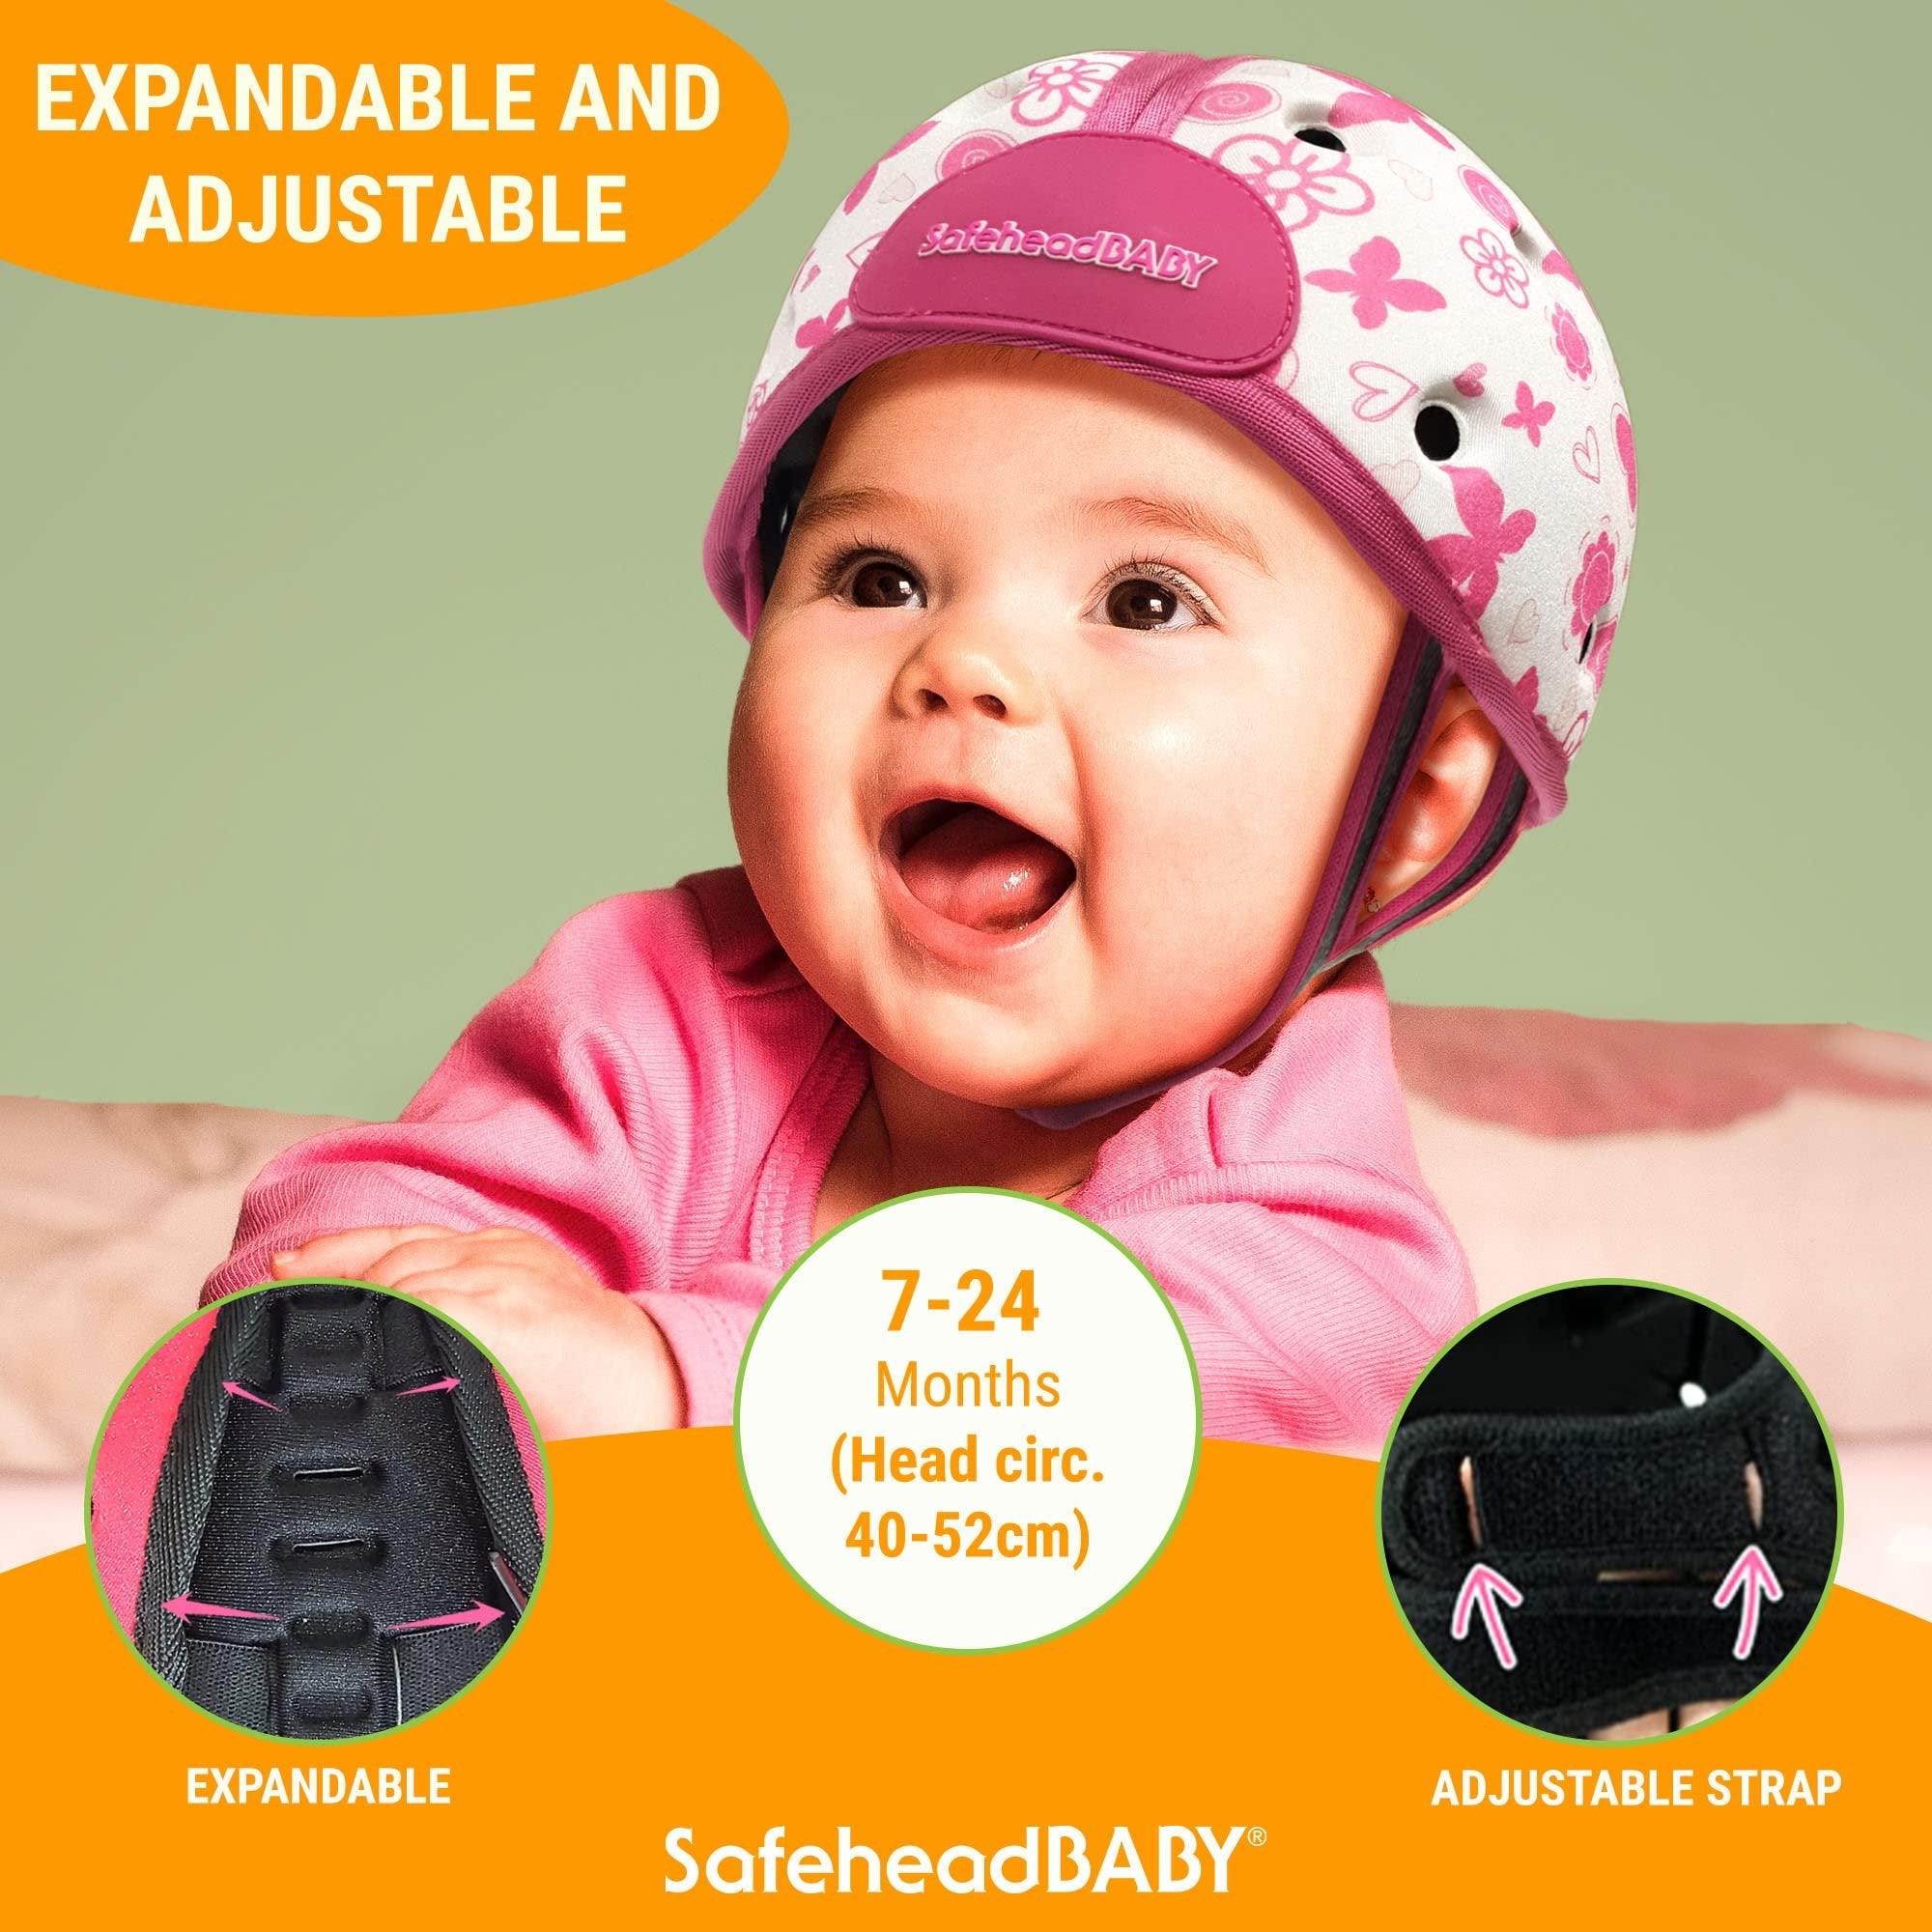 SafeheadBABY Infant Safety Helmet Sporty Blue - One Size, Crawling & Walking Head Protection, Ultra-Lightweight, Expandable, Certified